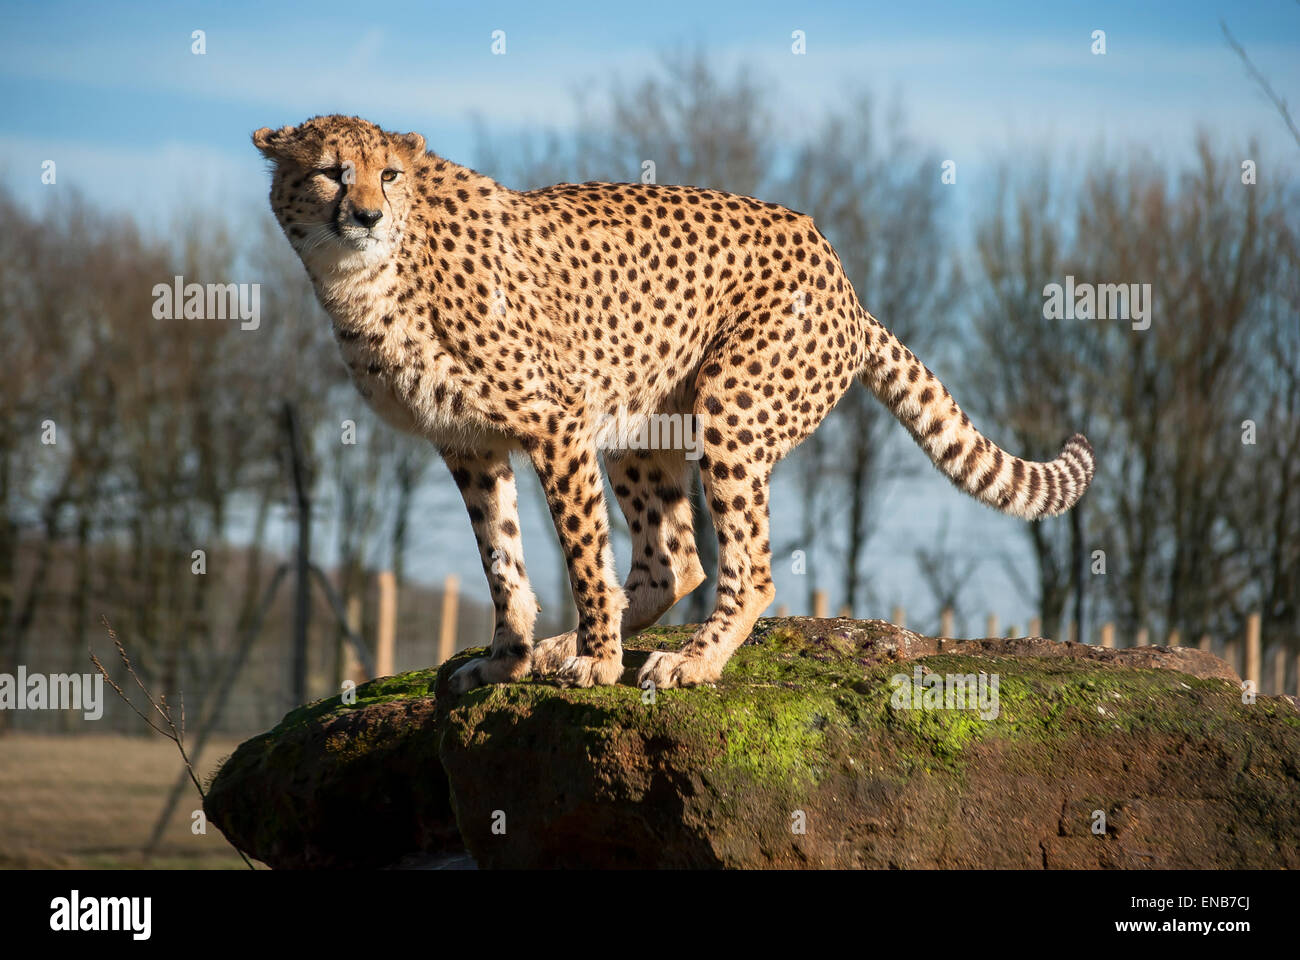 Cheetah in a very still pose Stock Photo